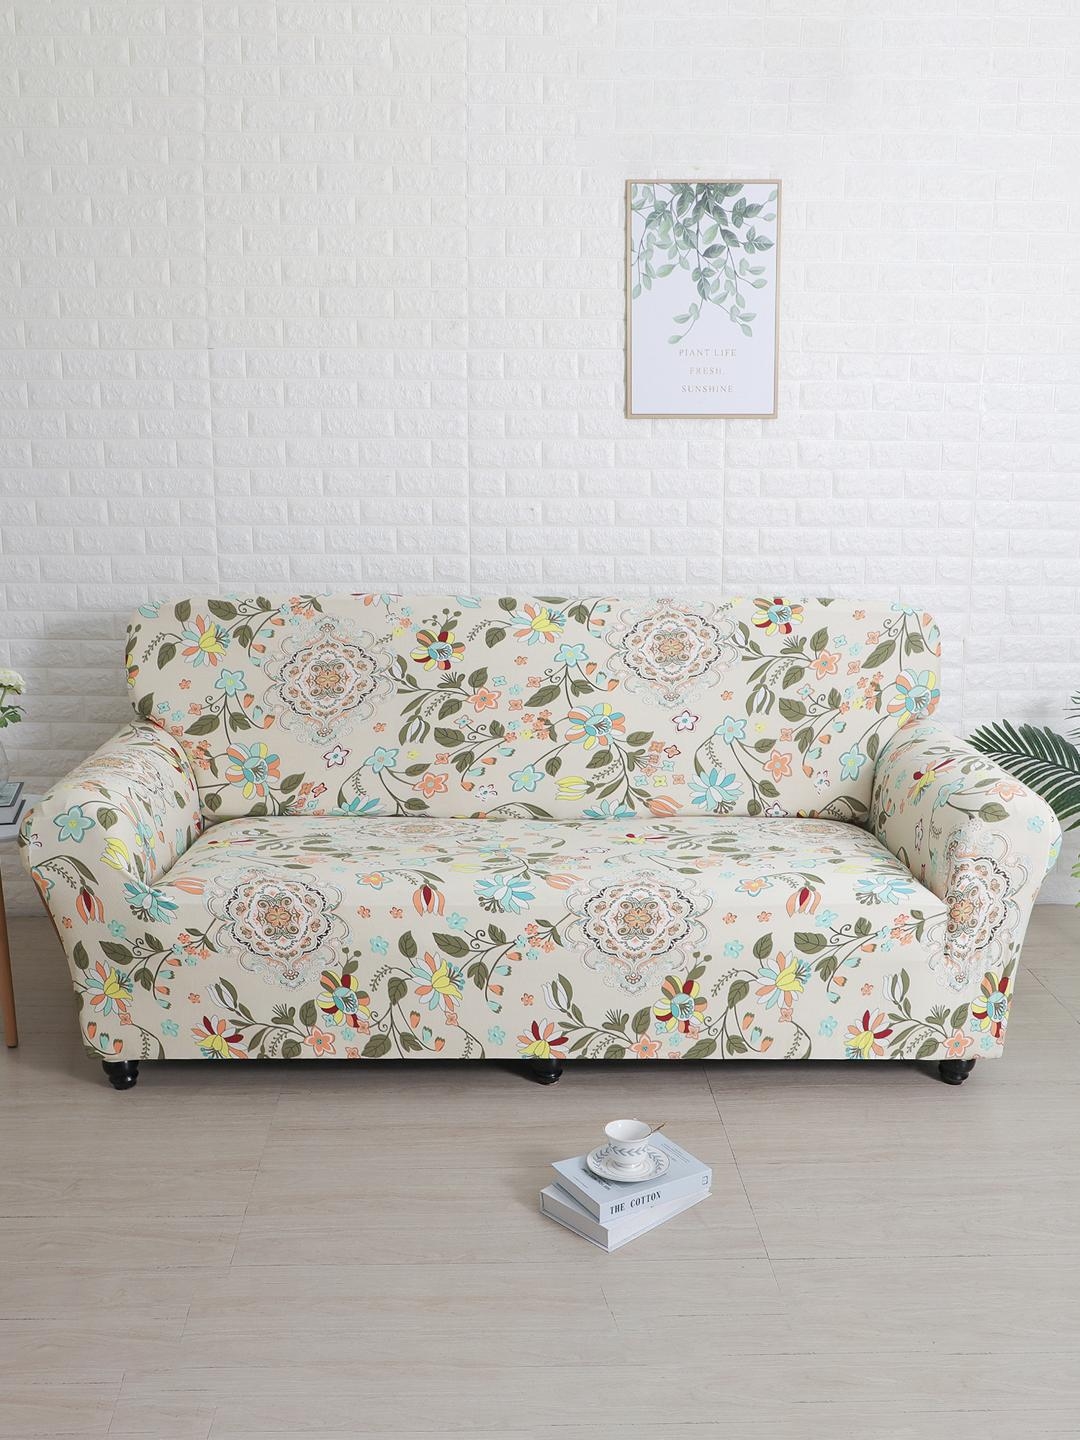 Kuber Industries Leaf Printed Stretchable, Non-Slip Polyster 3 Seater Sofa  Cover/Slipcover/Protector With Foam Stick (Cream)